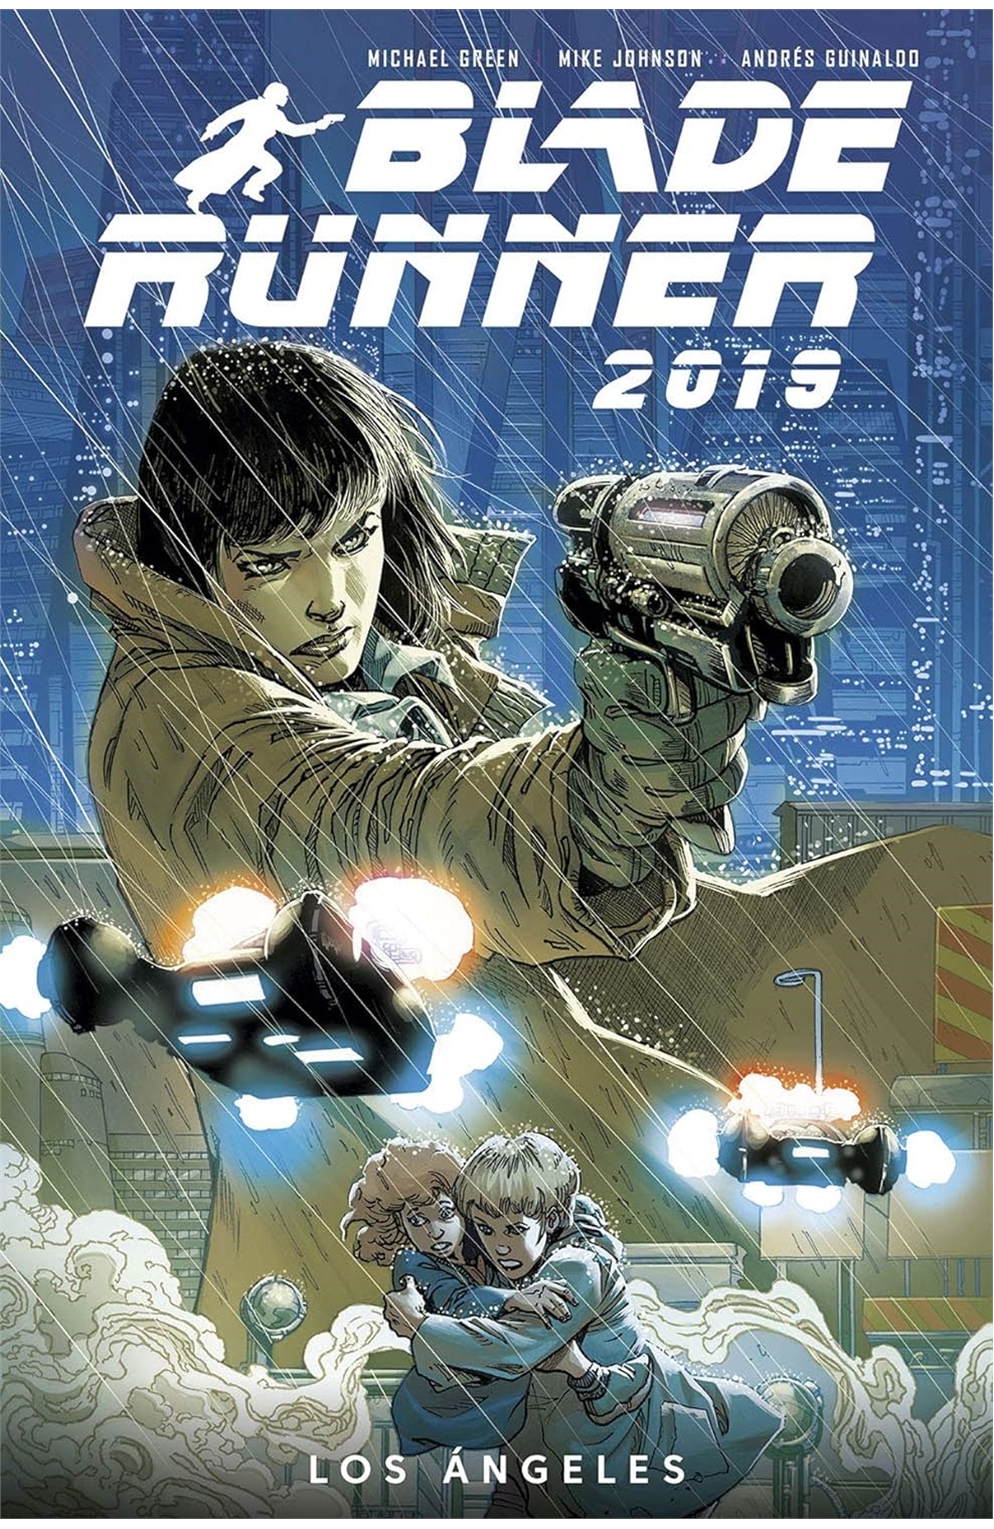 Blade Runner 2019 Graphic Novel Volume 1 Welcome To Los Angeles (New Printing)